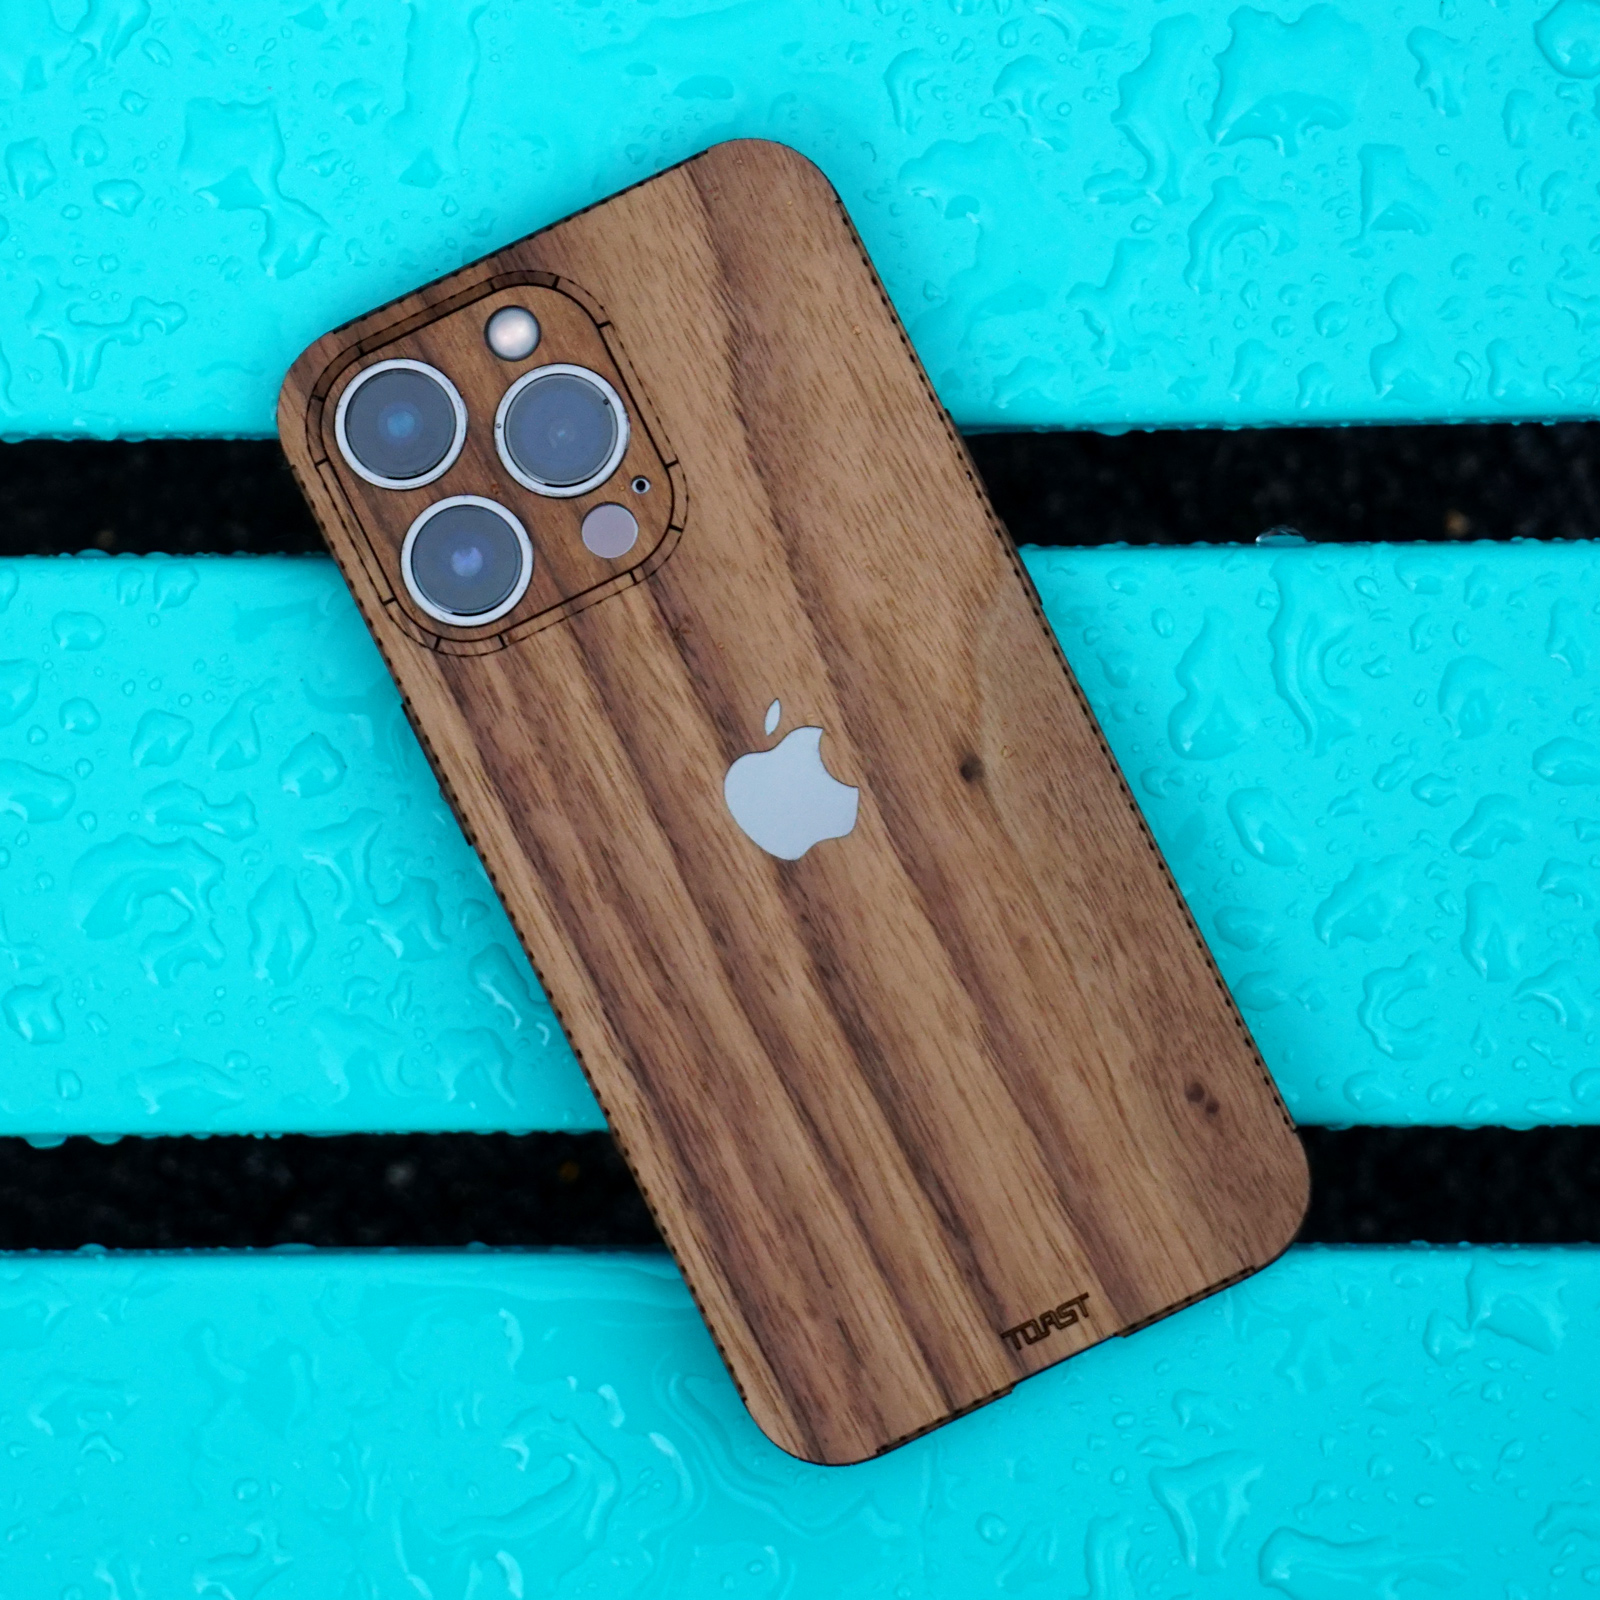 Ultra thin iPhone 14 Pro Max Slim Case made of wood